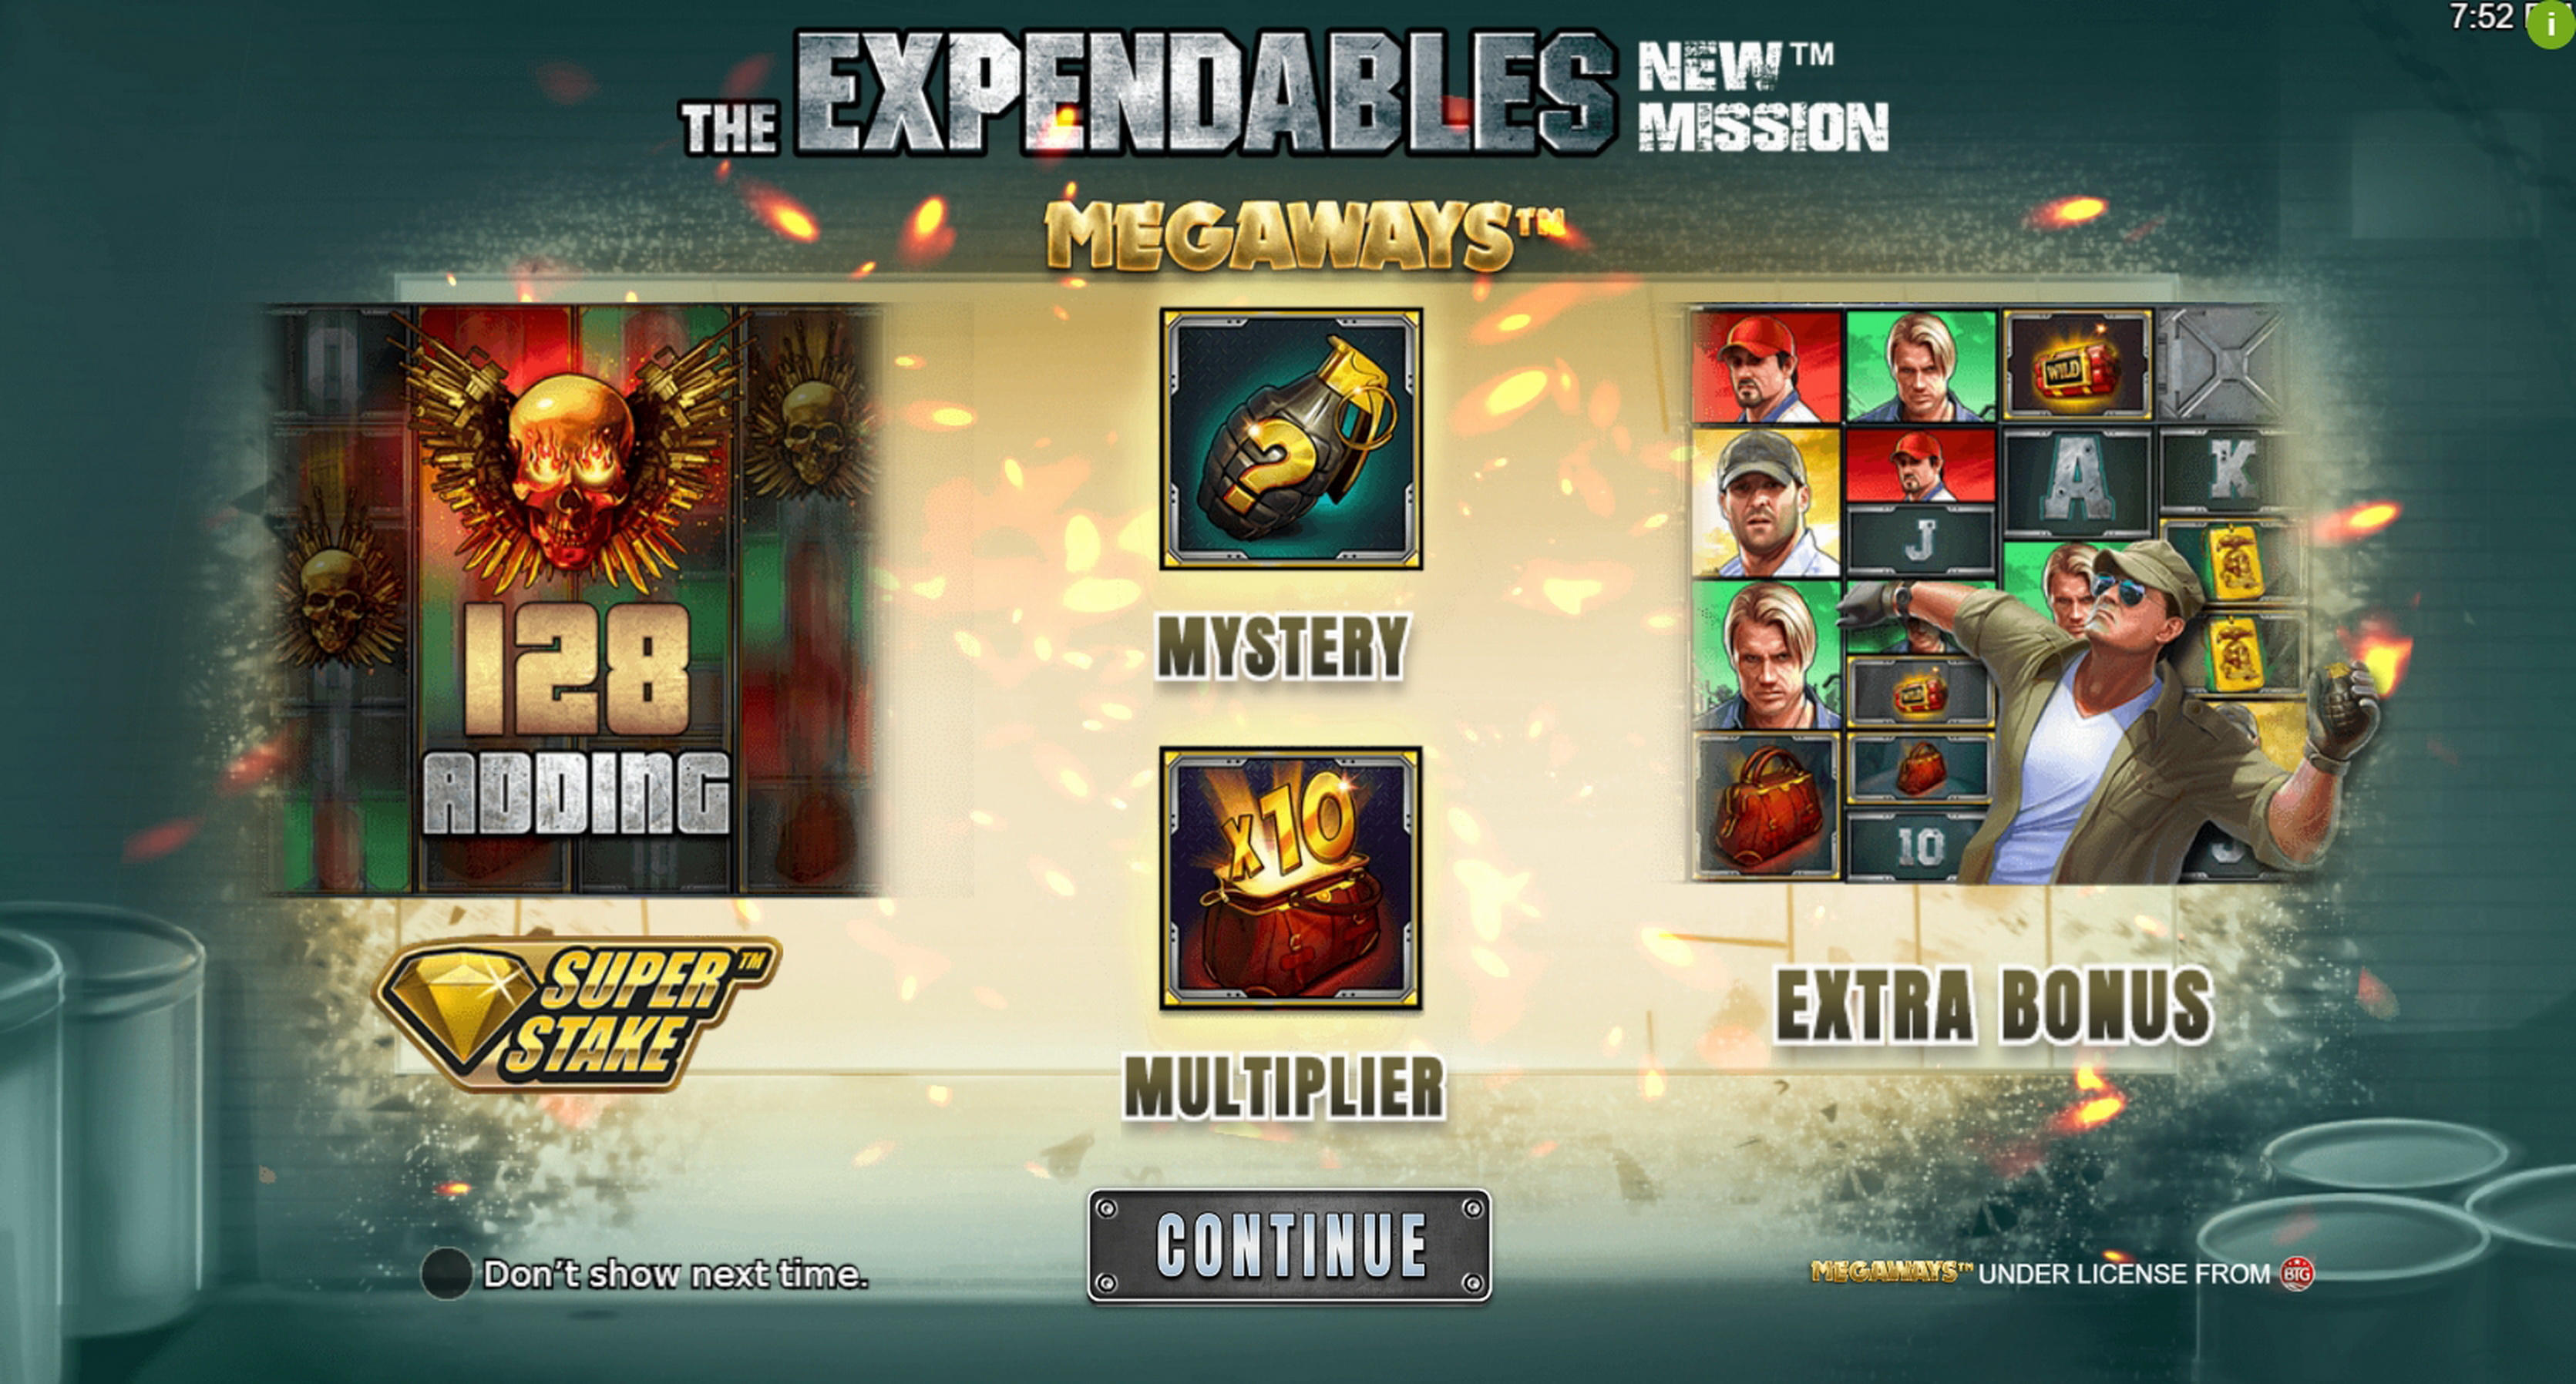 Play The Expendables New Mission Megaways Free Casino Slot Game by Stakelogic